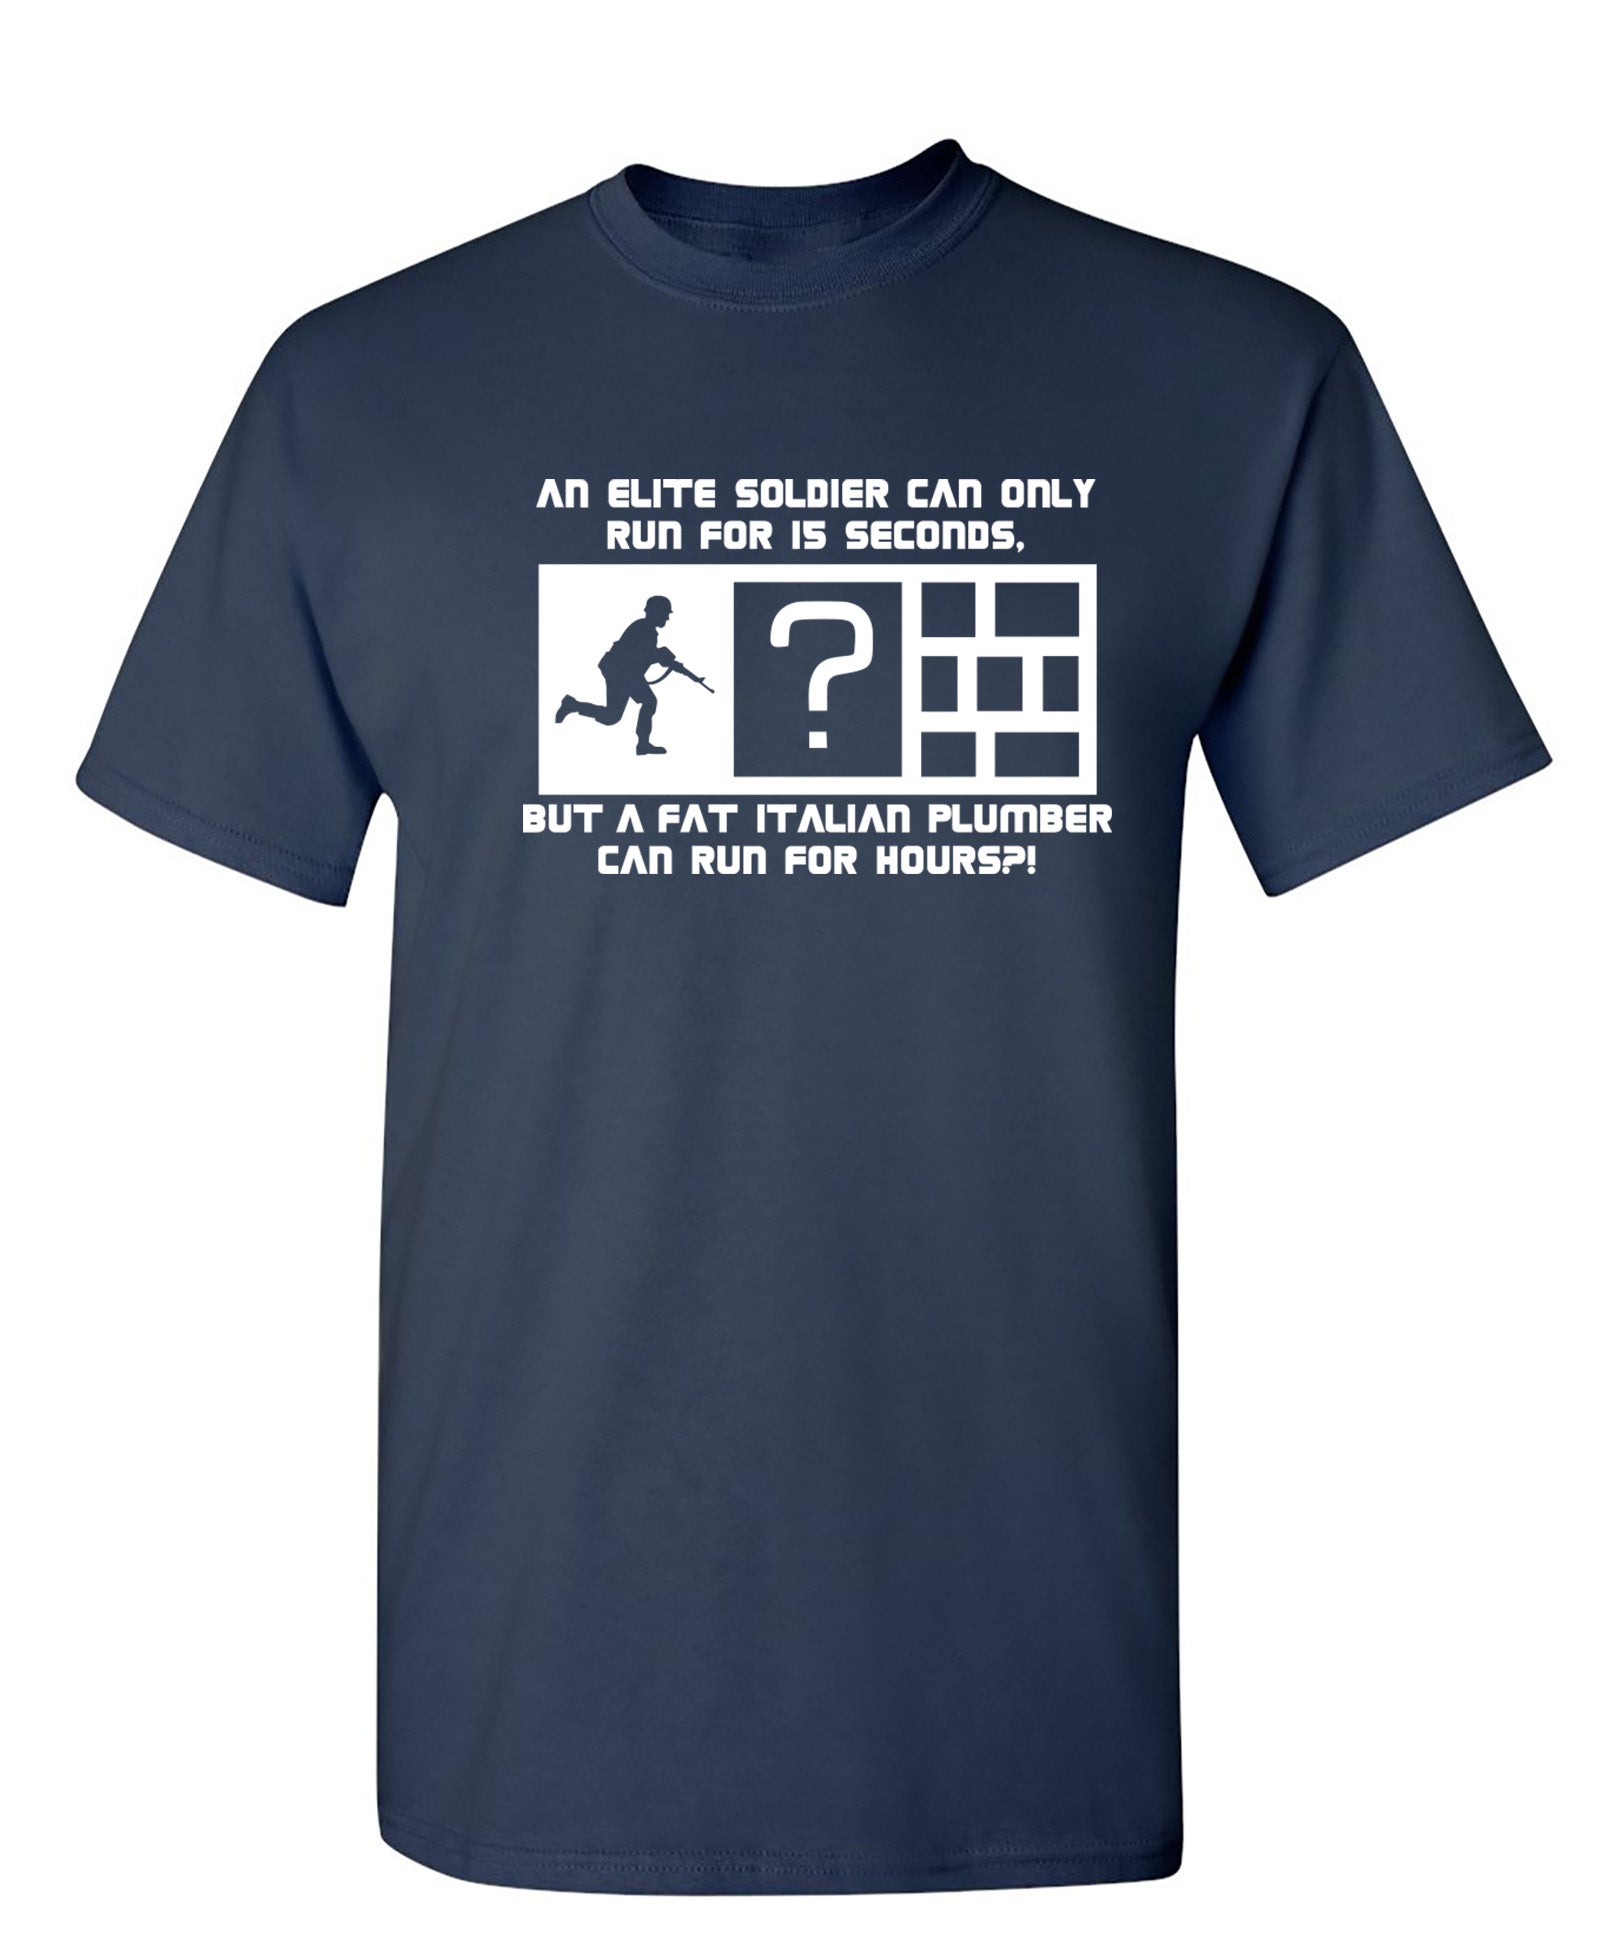 An Elite Soldier Can Only Run For 15 Seconds - Funny T Shirts & Graphic Tees